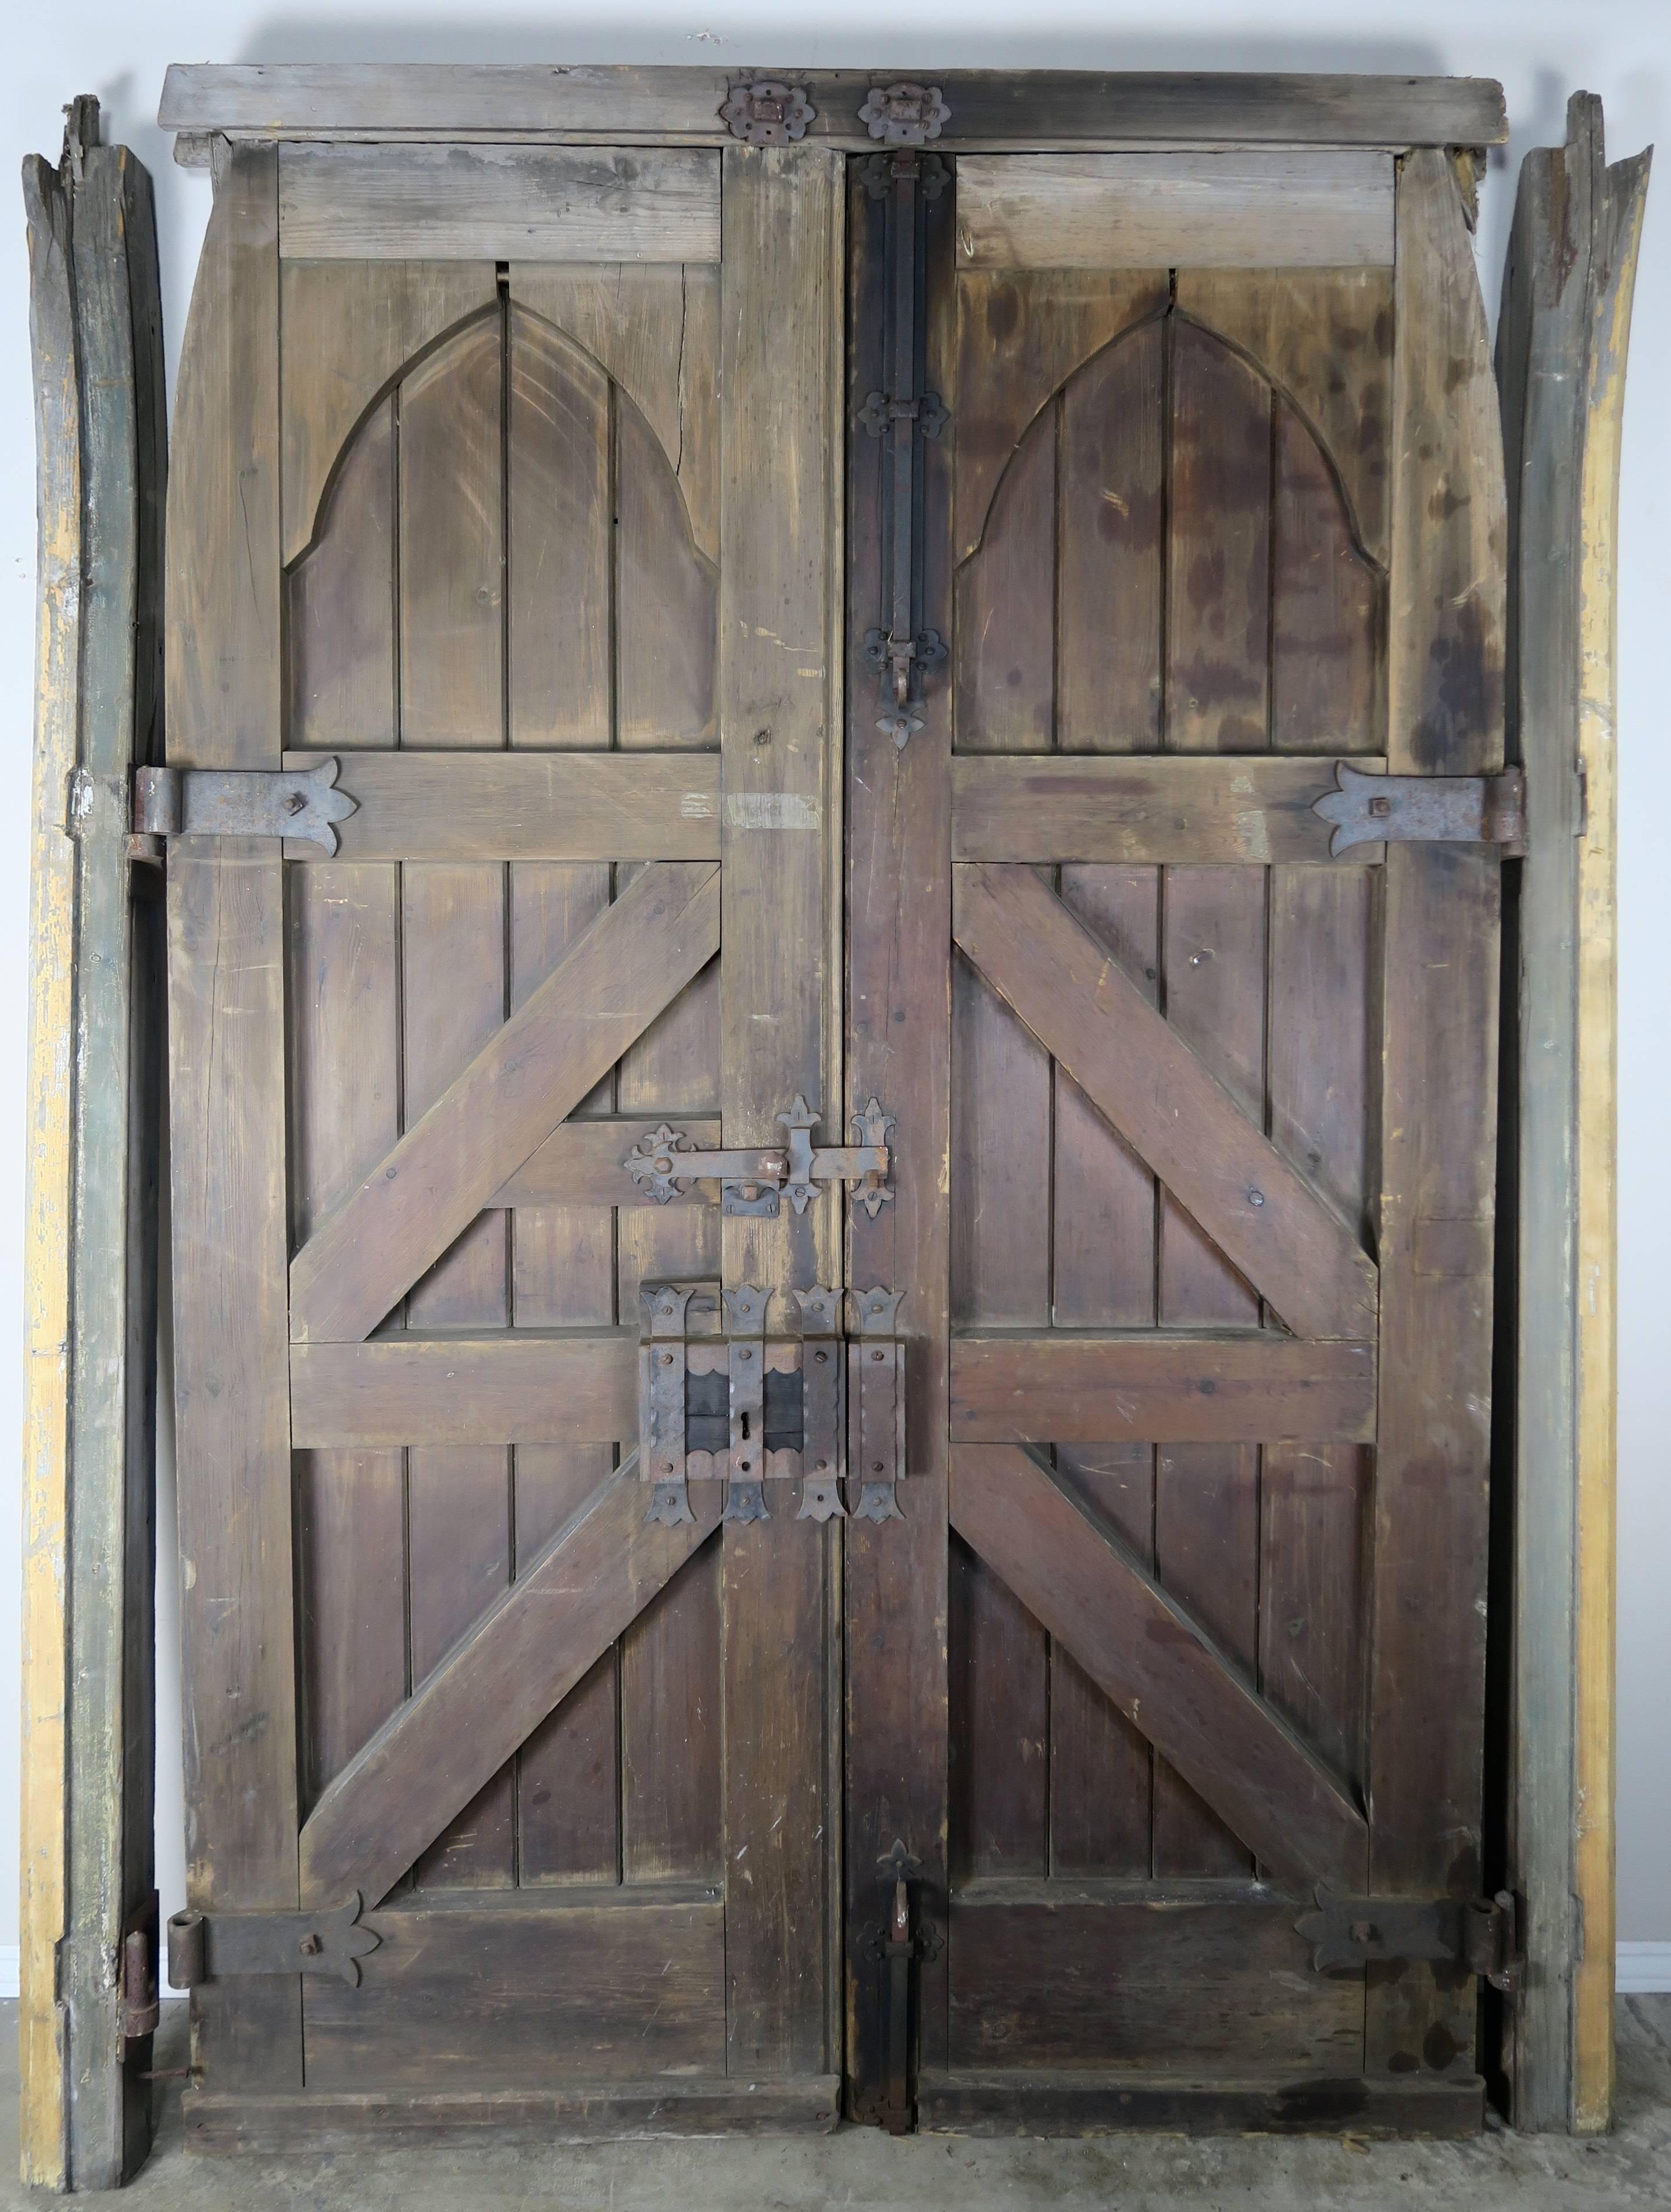 Pair of monumental Spanish barn doors with heavy iron hinges on door fronts and detailed locking iron hardware on inside.

Each Door is 29